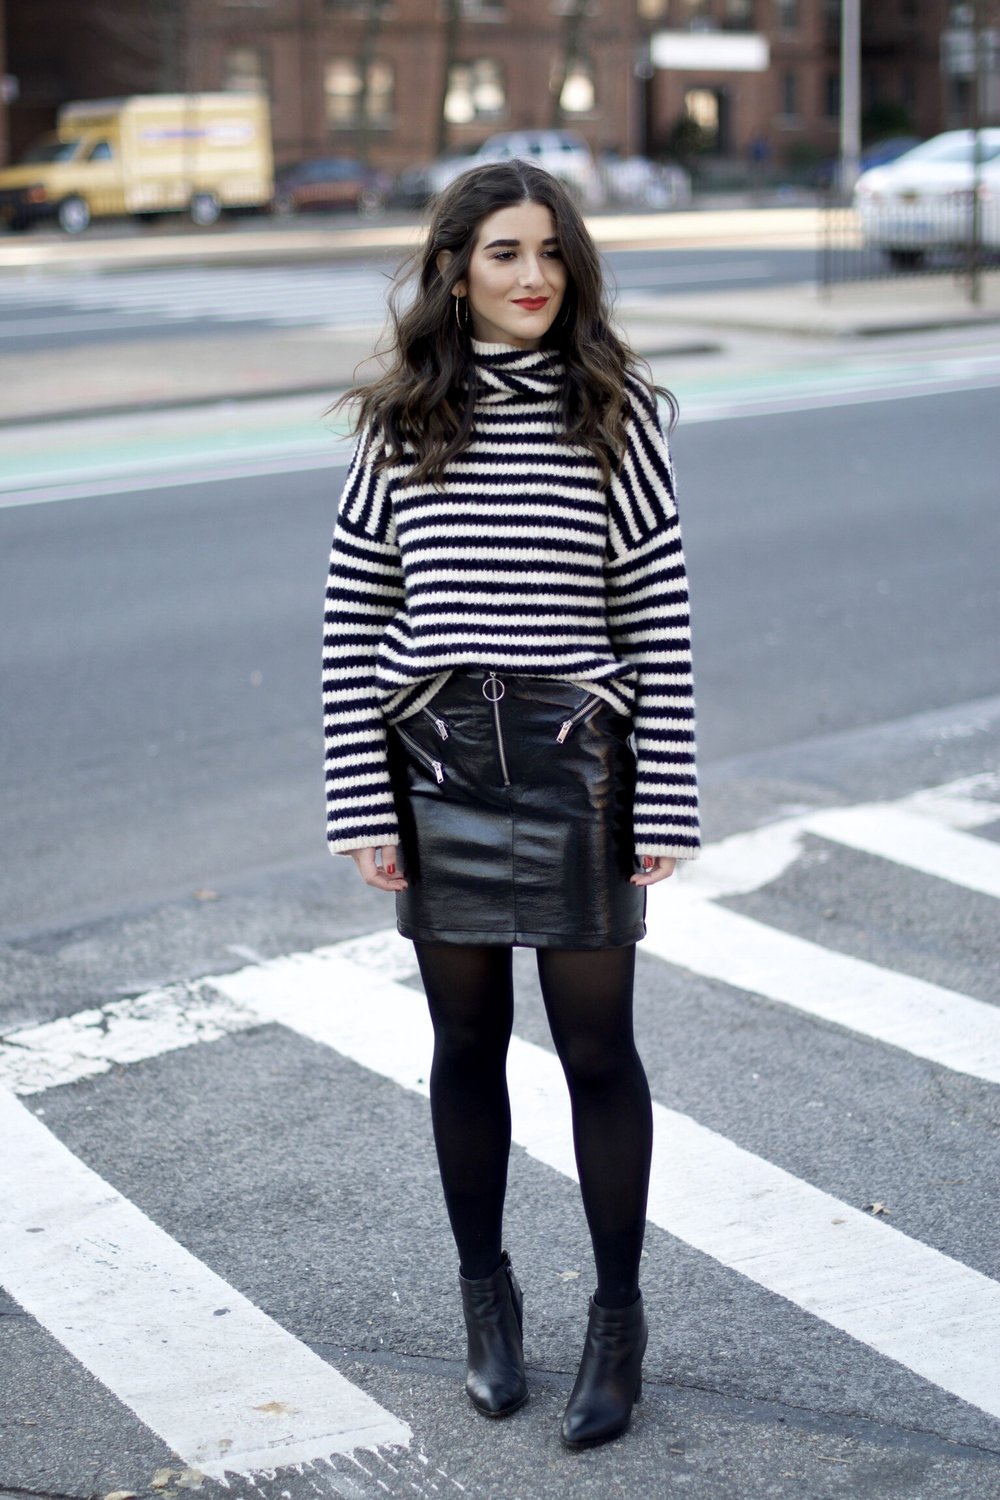 Striped Turtleneck Sweater + Pleather Skirt // The Right Way To Ask Someone To Meet For Coffee